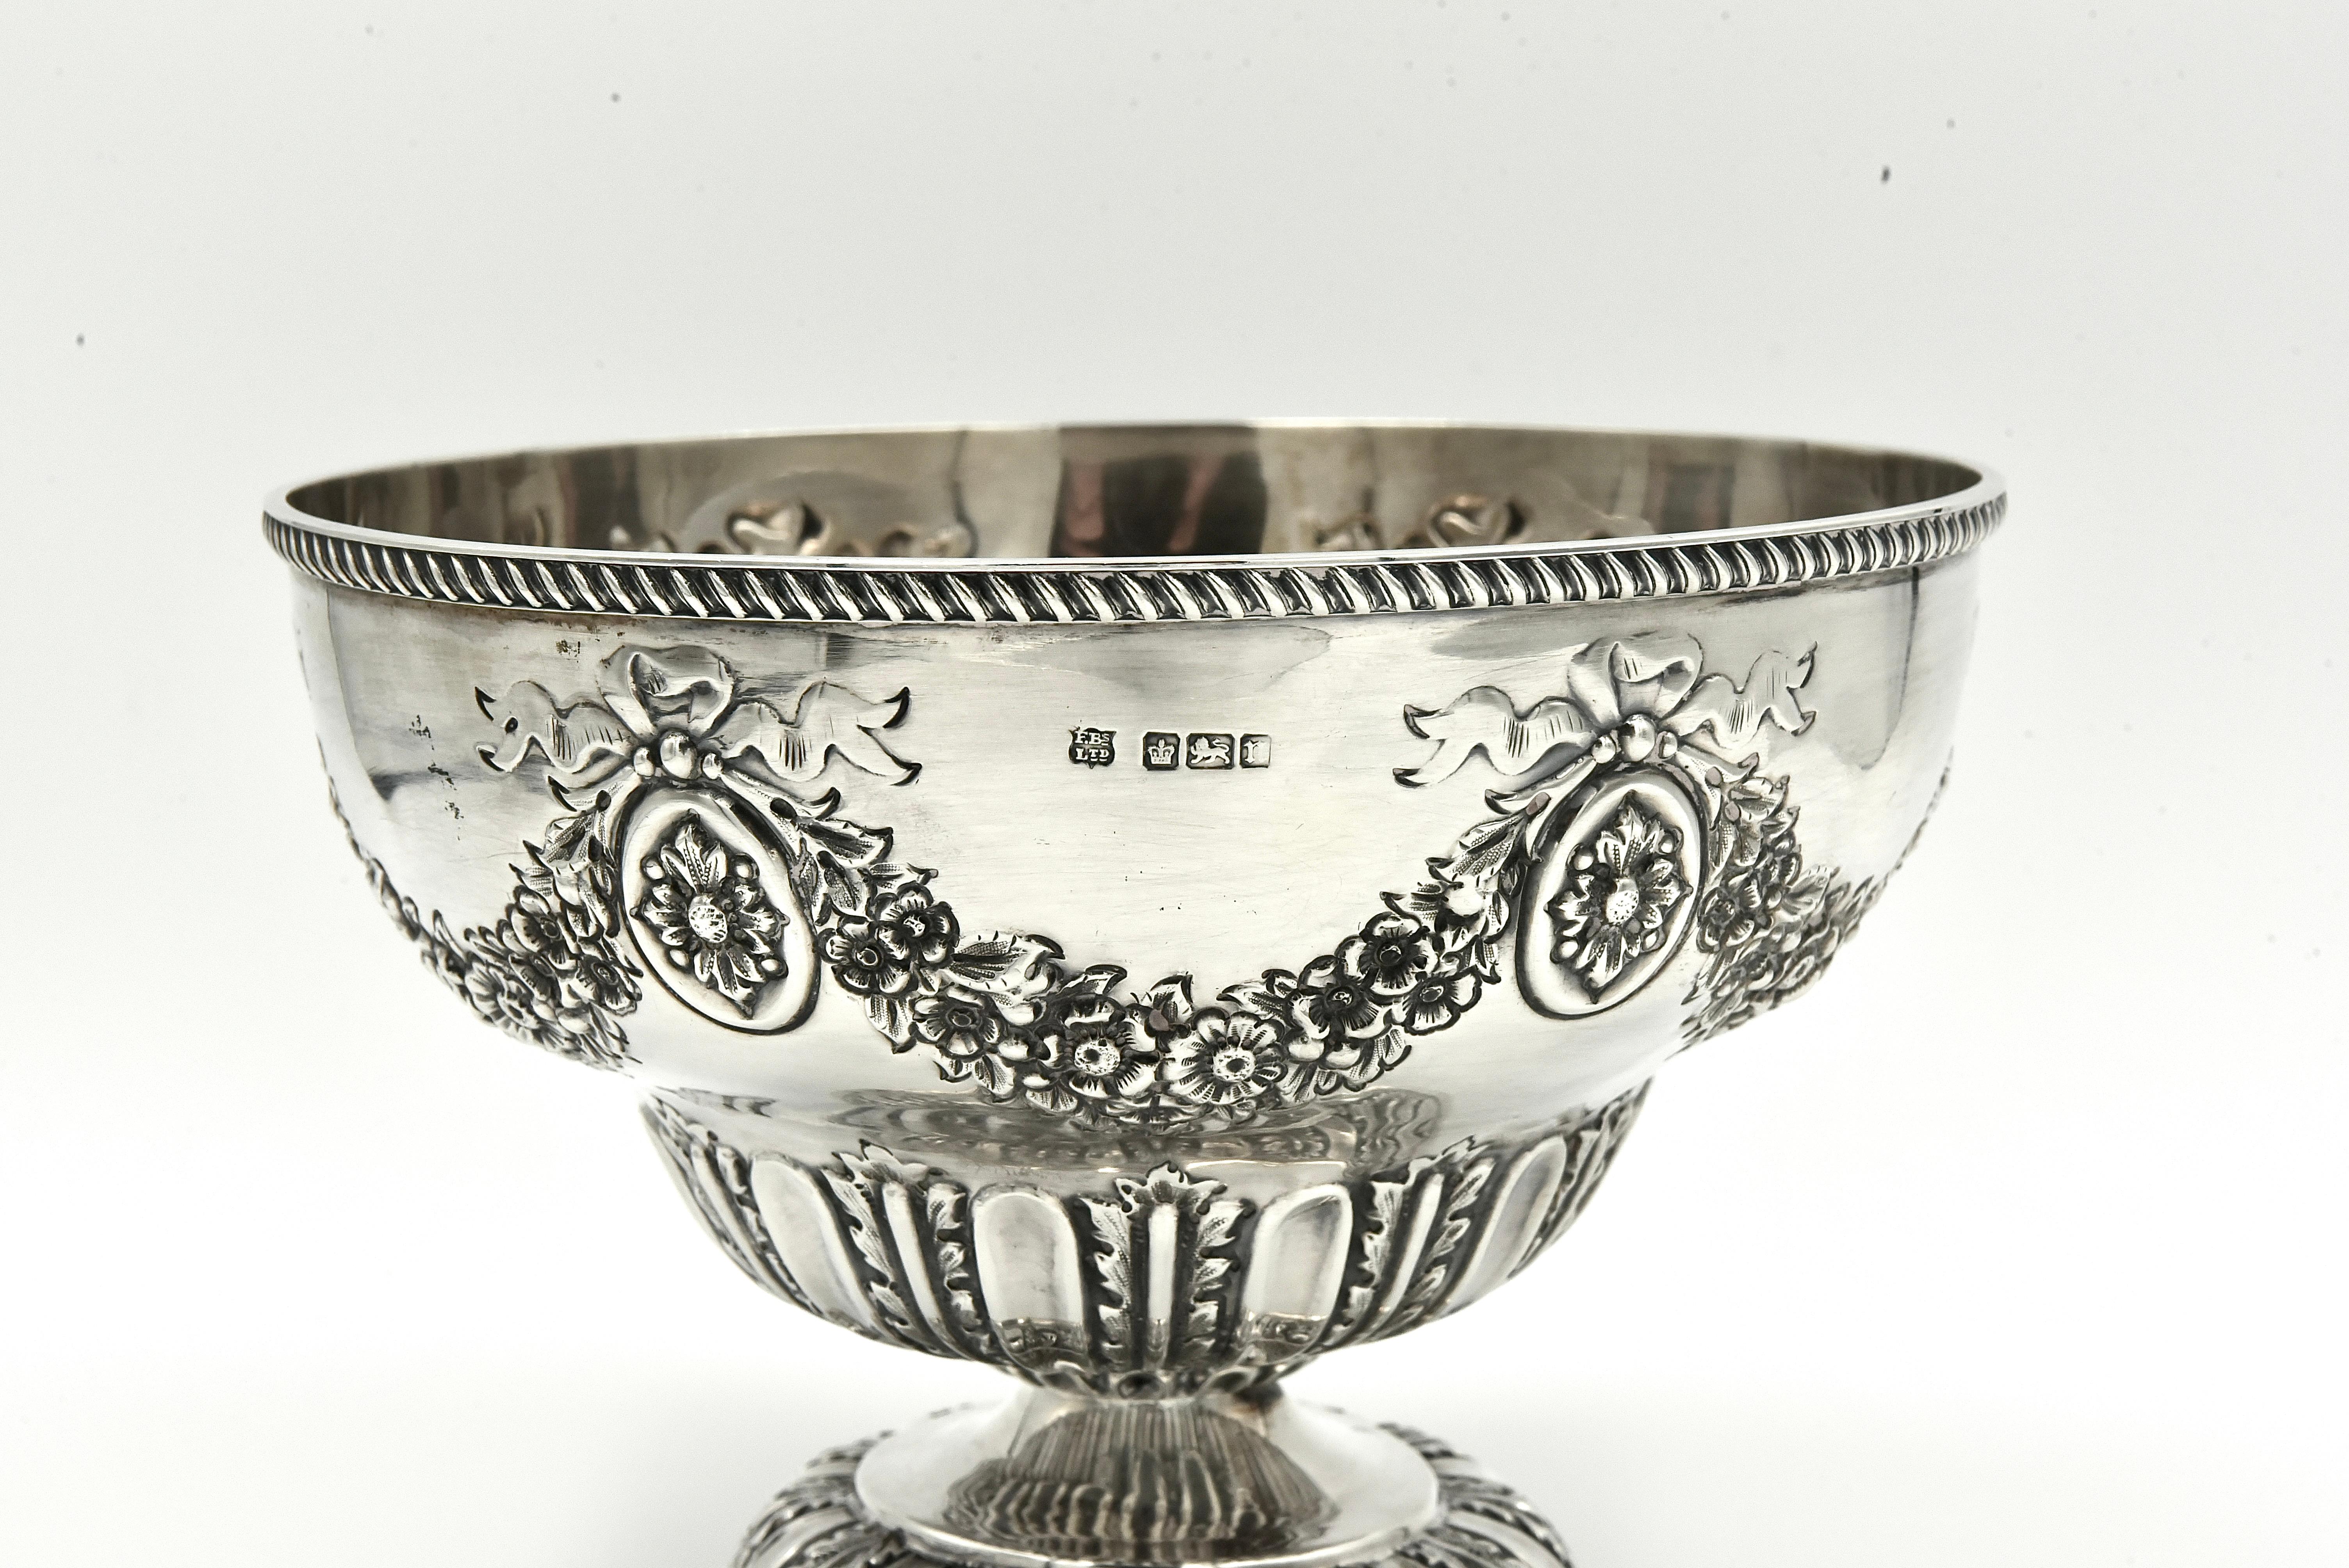 A superb sterling silver fruit bowl ,
 It is a very decorative piece of silver with swag and ribbon decoration that really does catch the eye. The thick gauge of silver used gives it a lovely deep shine and a solid feel to handle.
Fully hallmarked